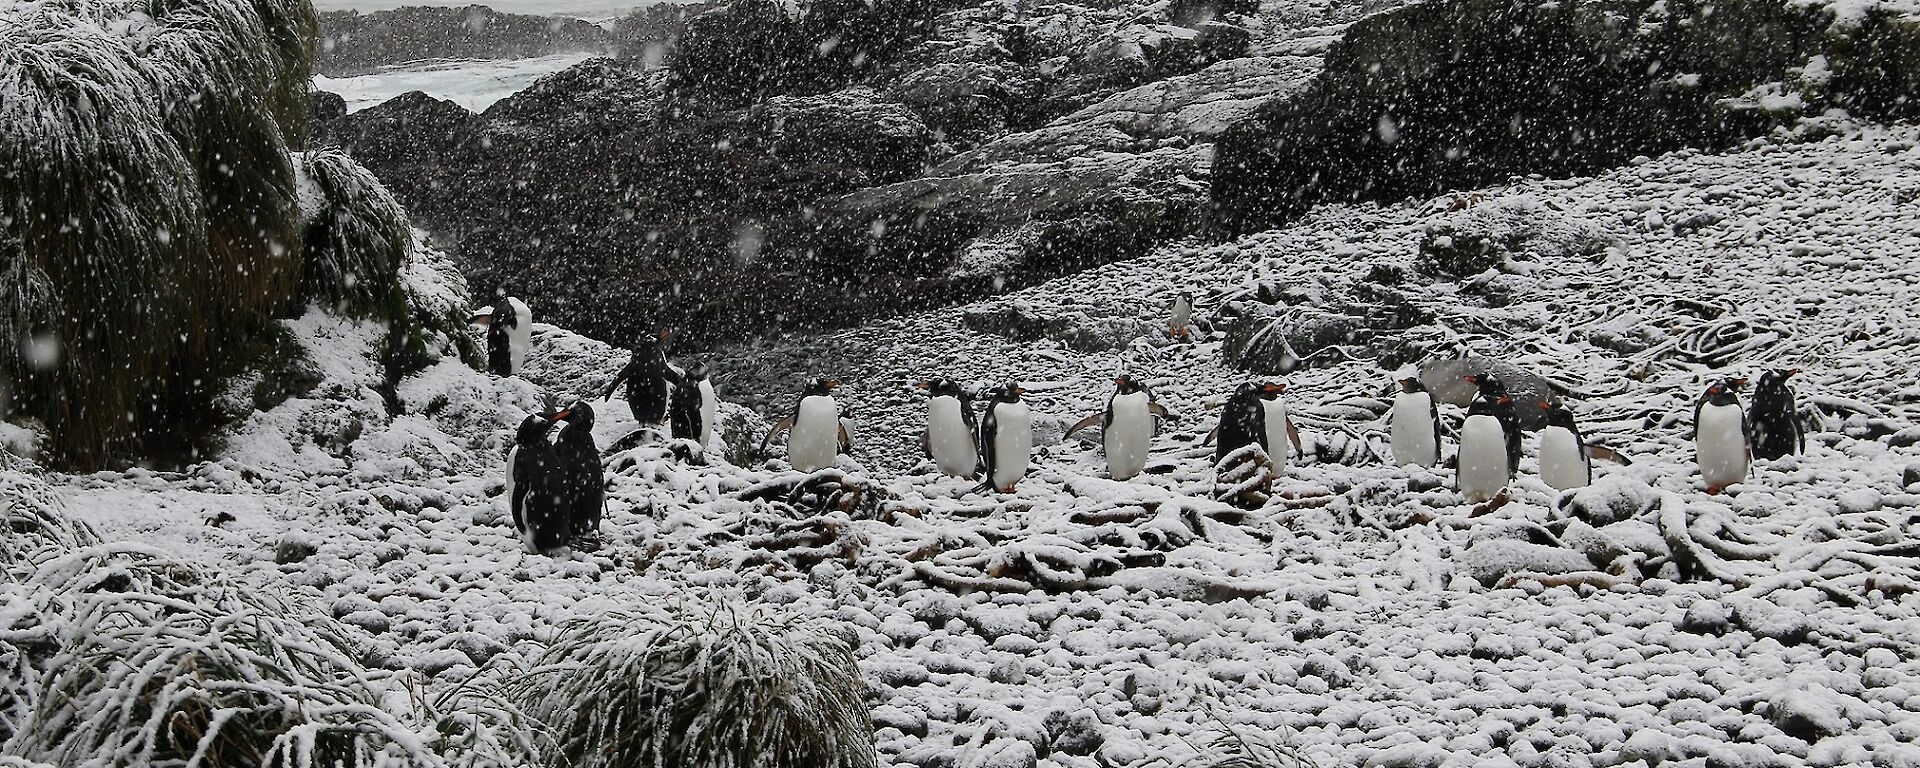 Gentoo penguins in the snow at Eagle Bay